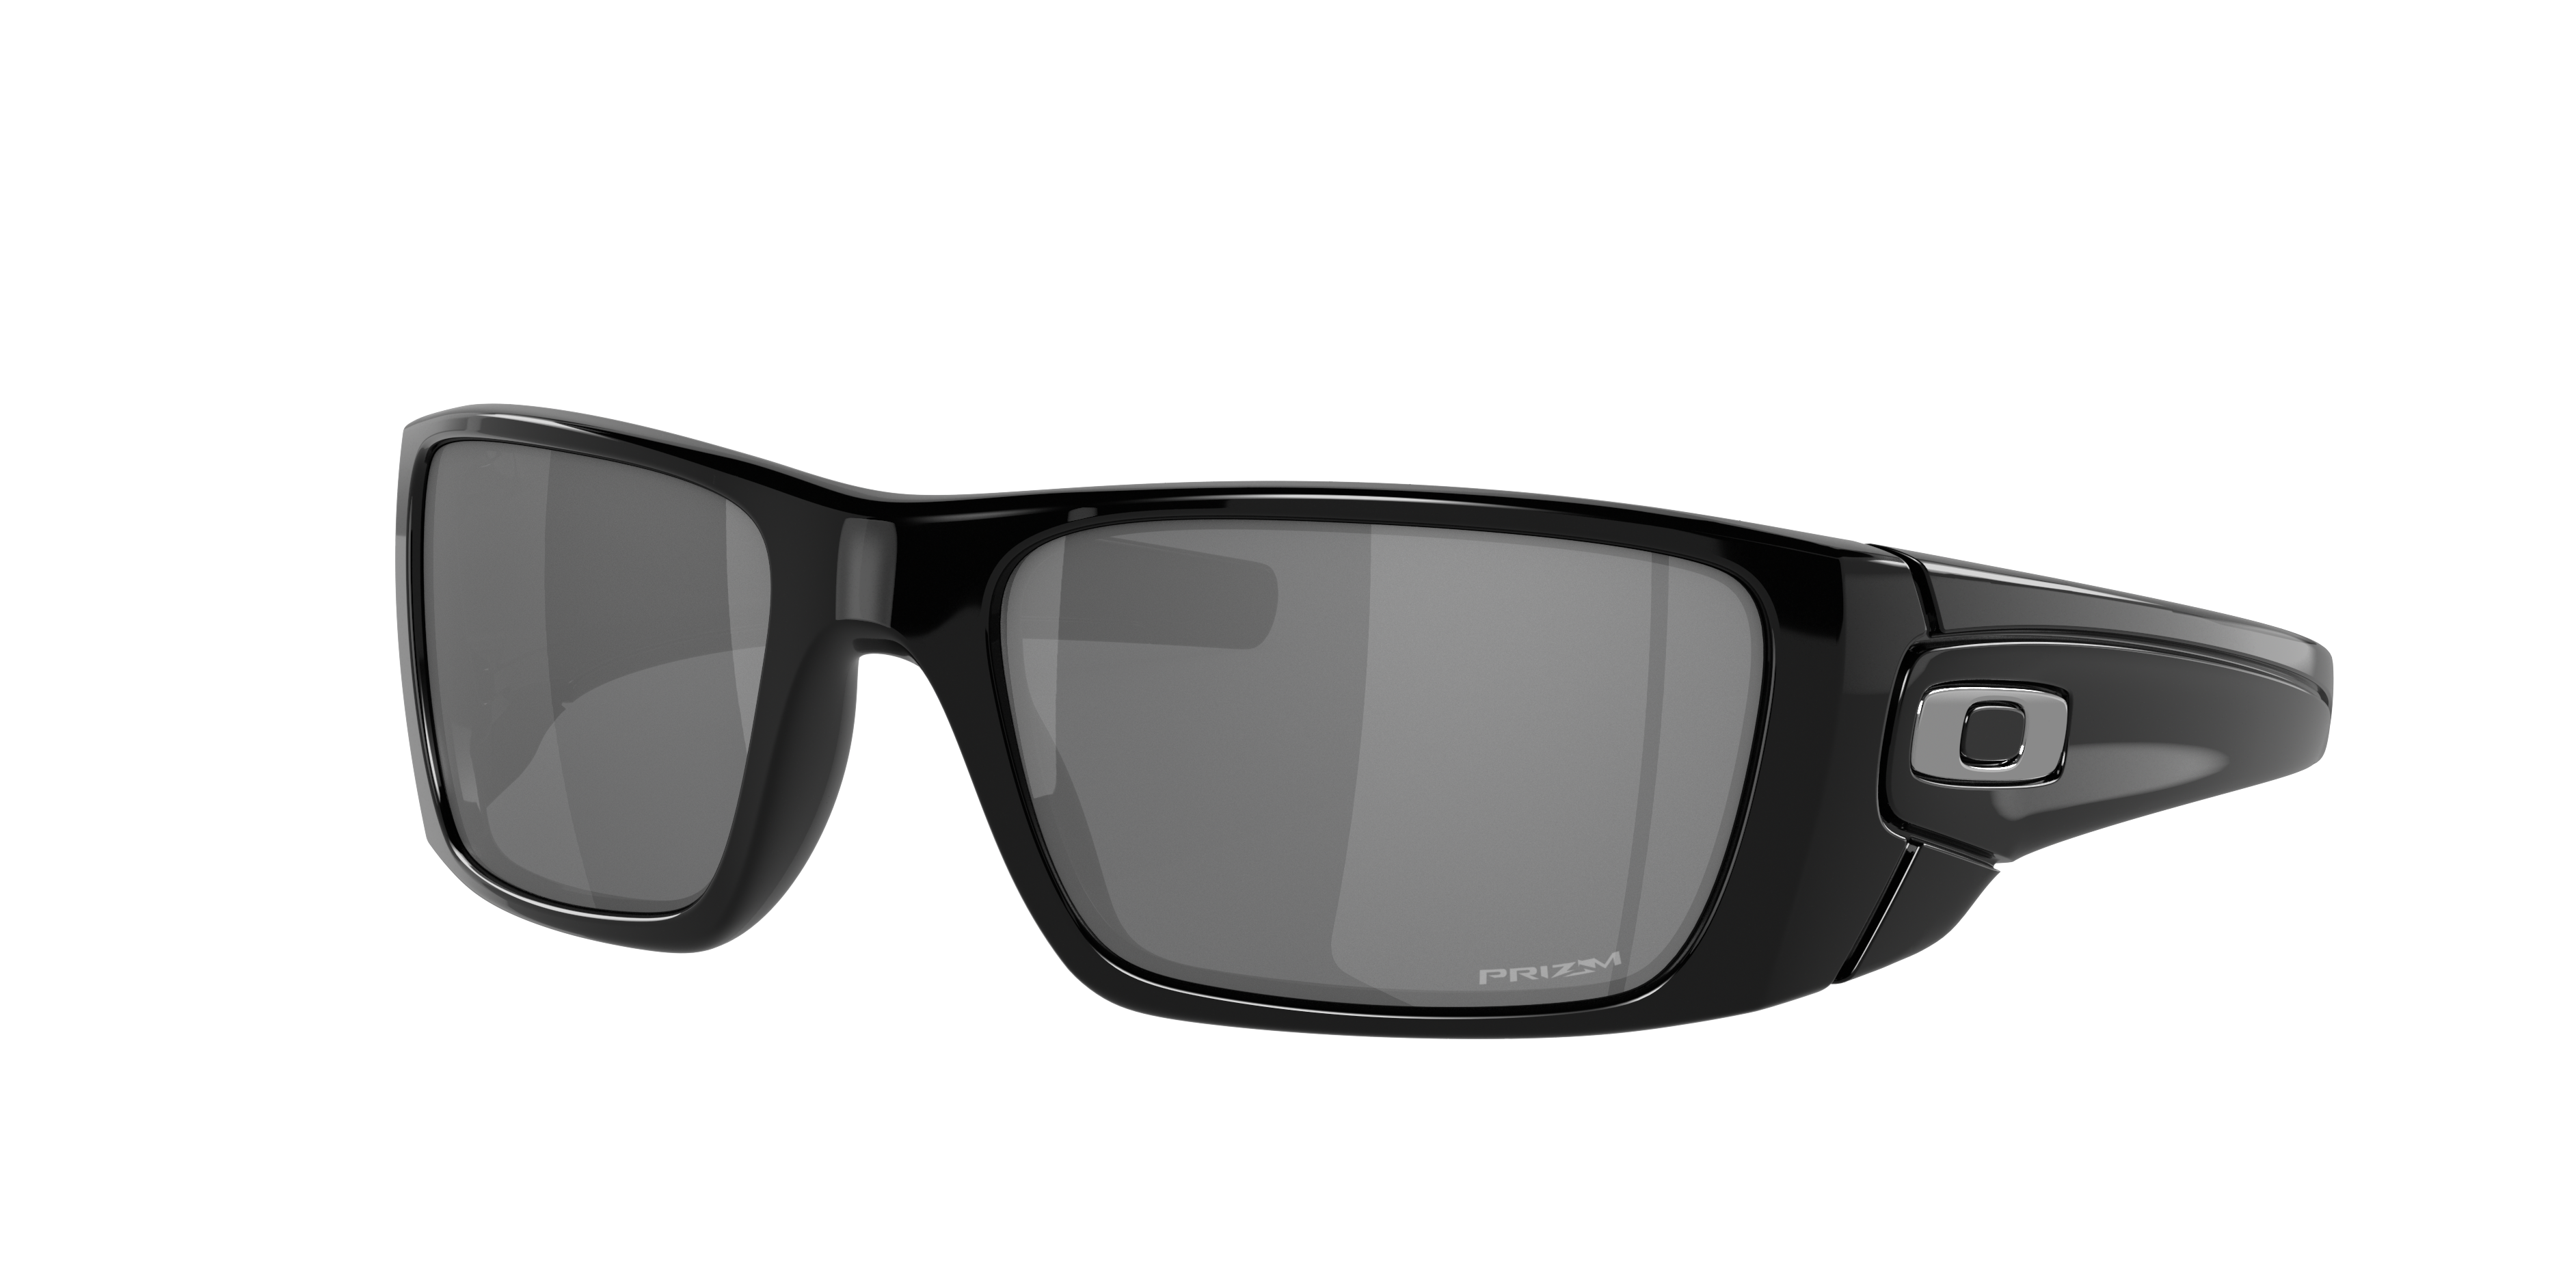 fuel cell glasses